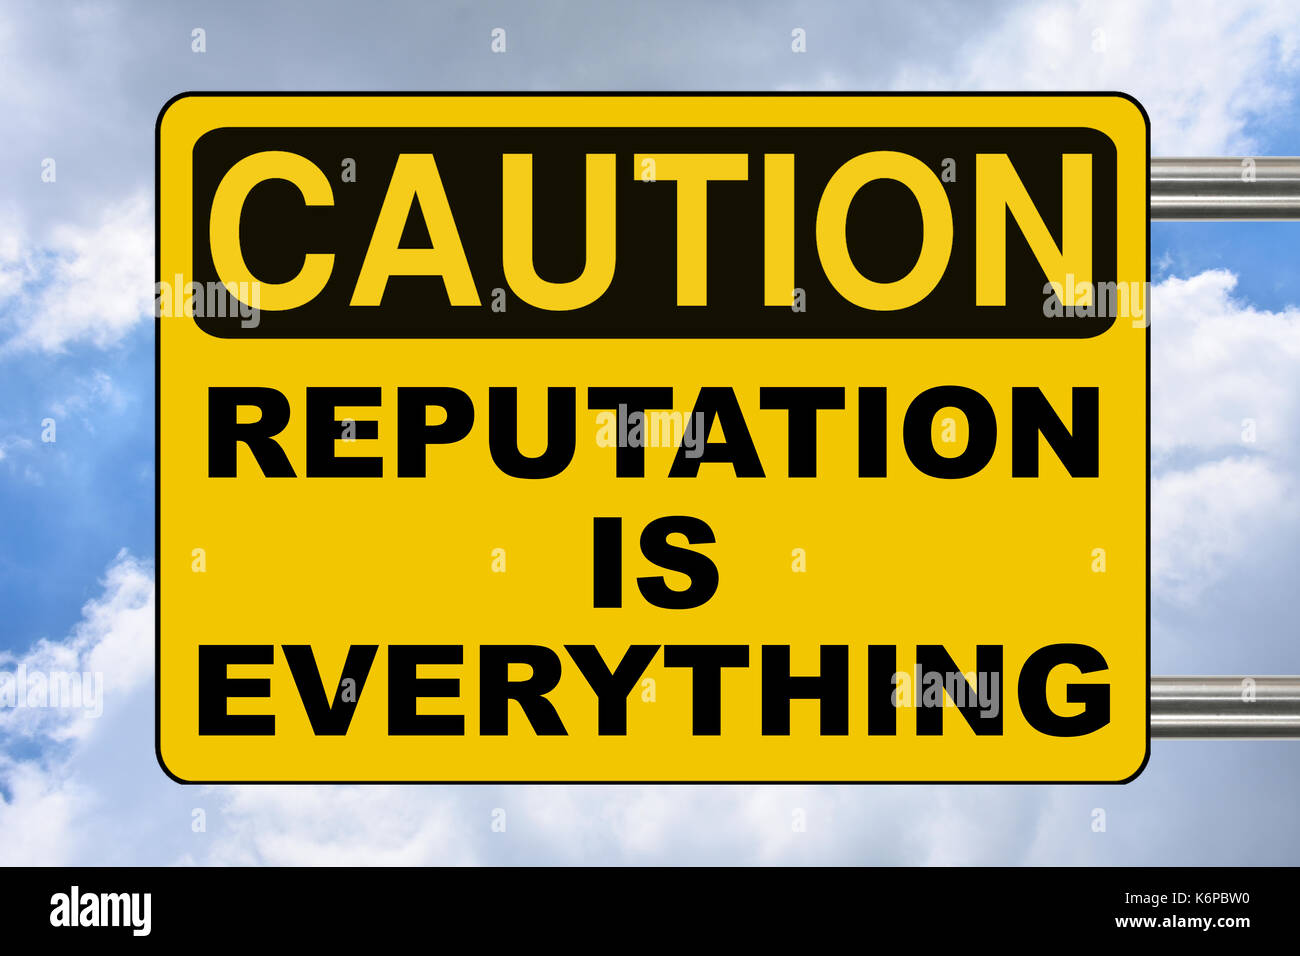 Reputation is everything, caution yellow road sign Stock Photo